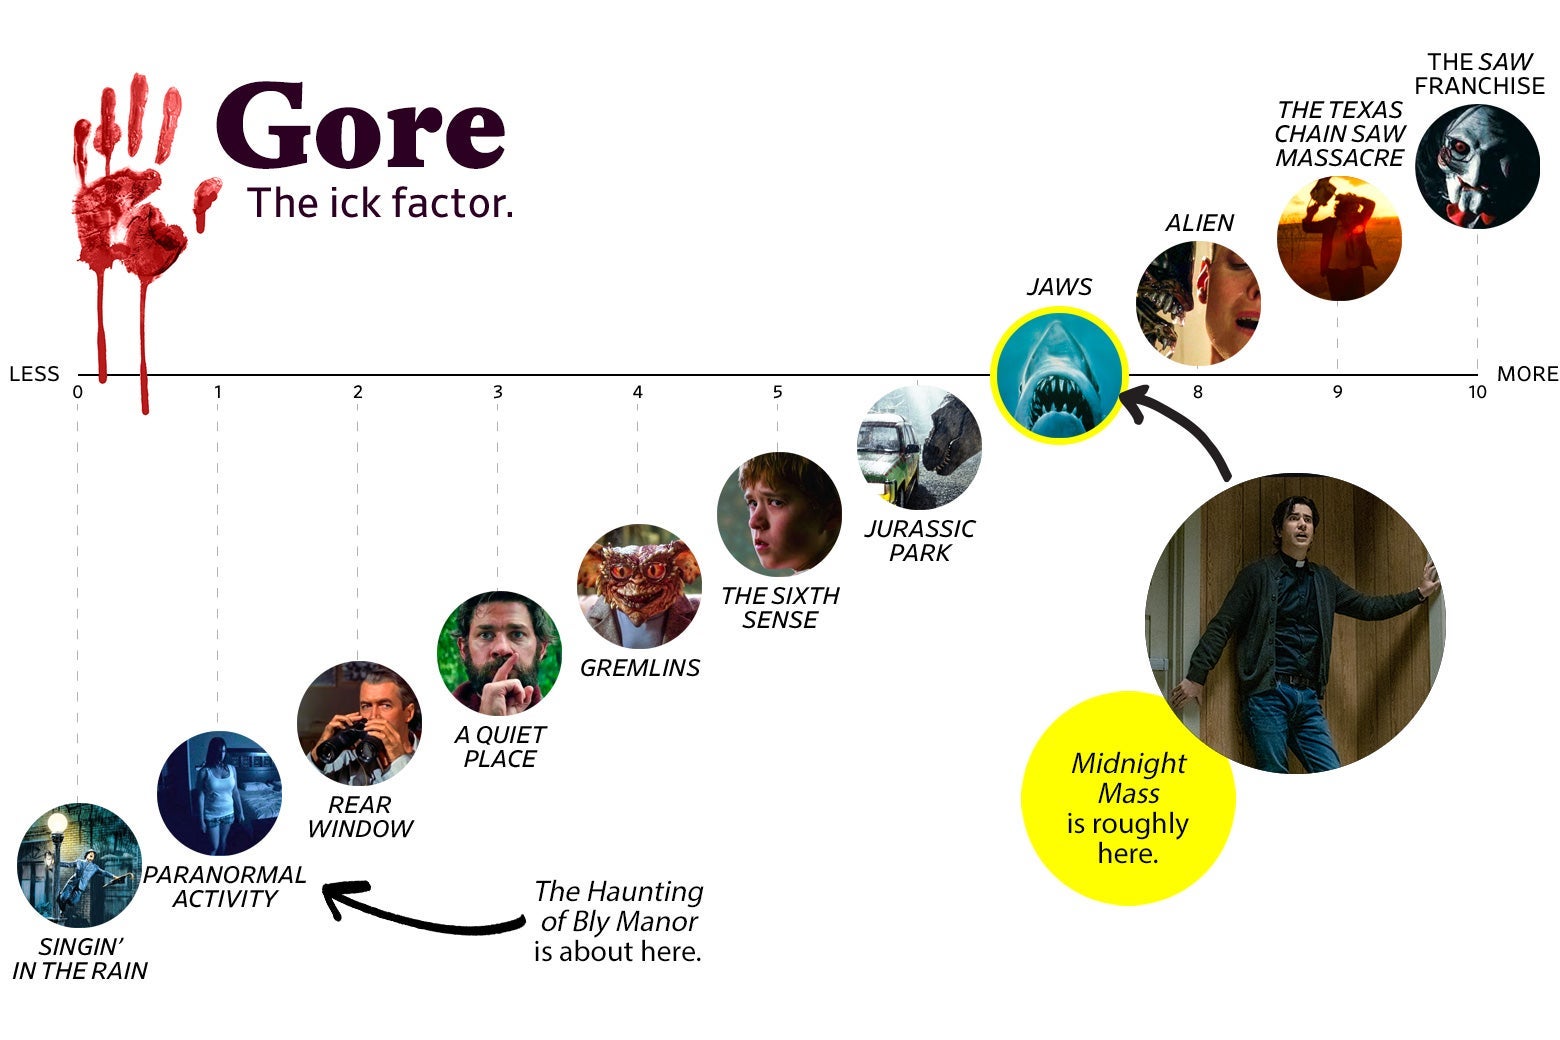 A chart titled “Gore: the Ick Factor” shows that Midnight Mass ranks a 7 in gore, roughly the same as Jaws. Bly Manor ranked a 1, roughly the same as Paranormal Activity. The scale ranges from Singin’ in the Rain (0) to the Saw franchise (10). 